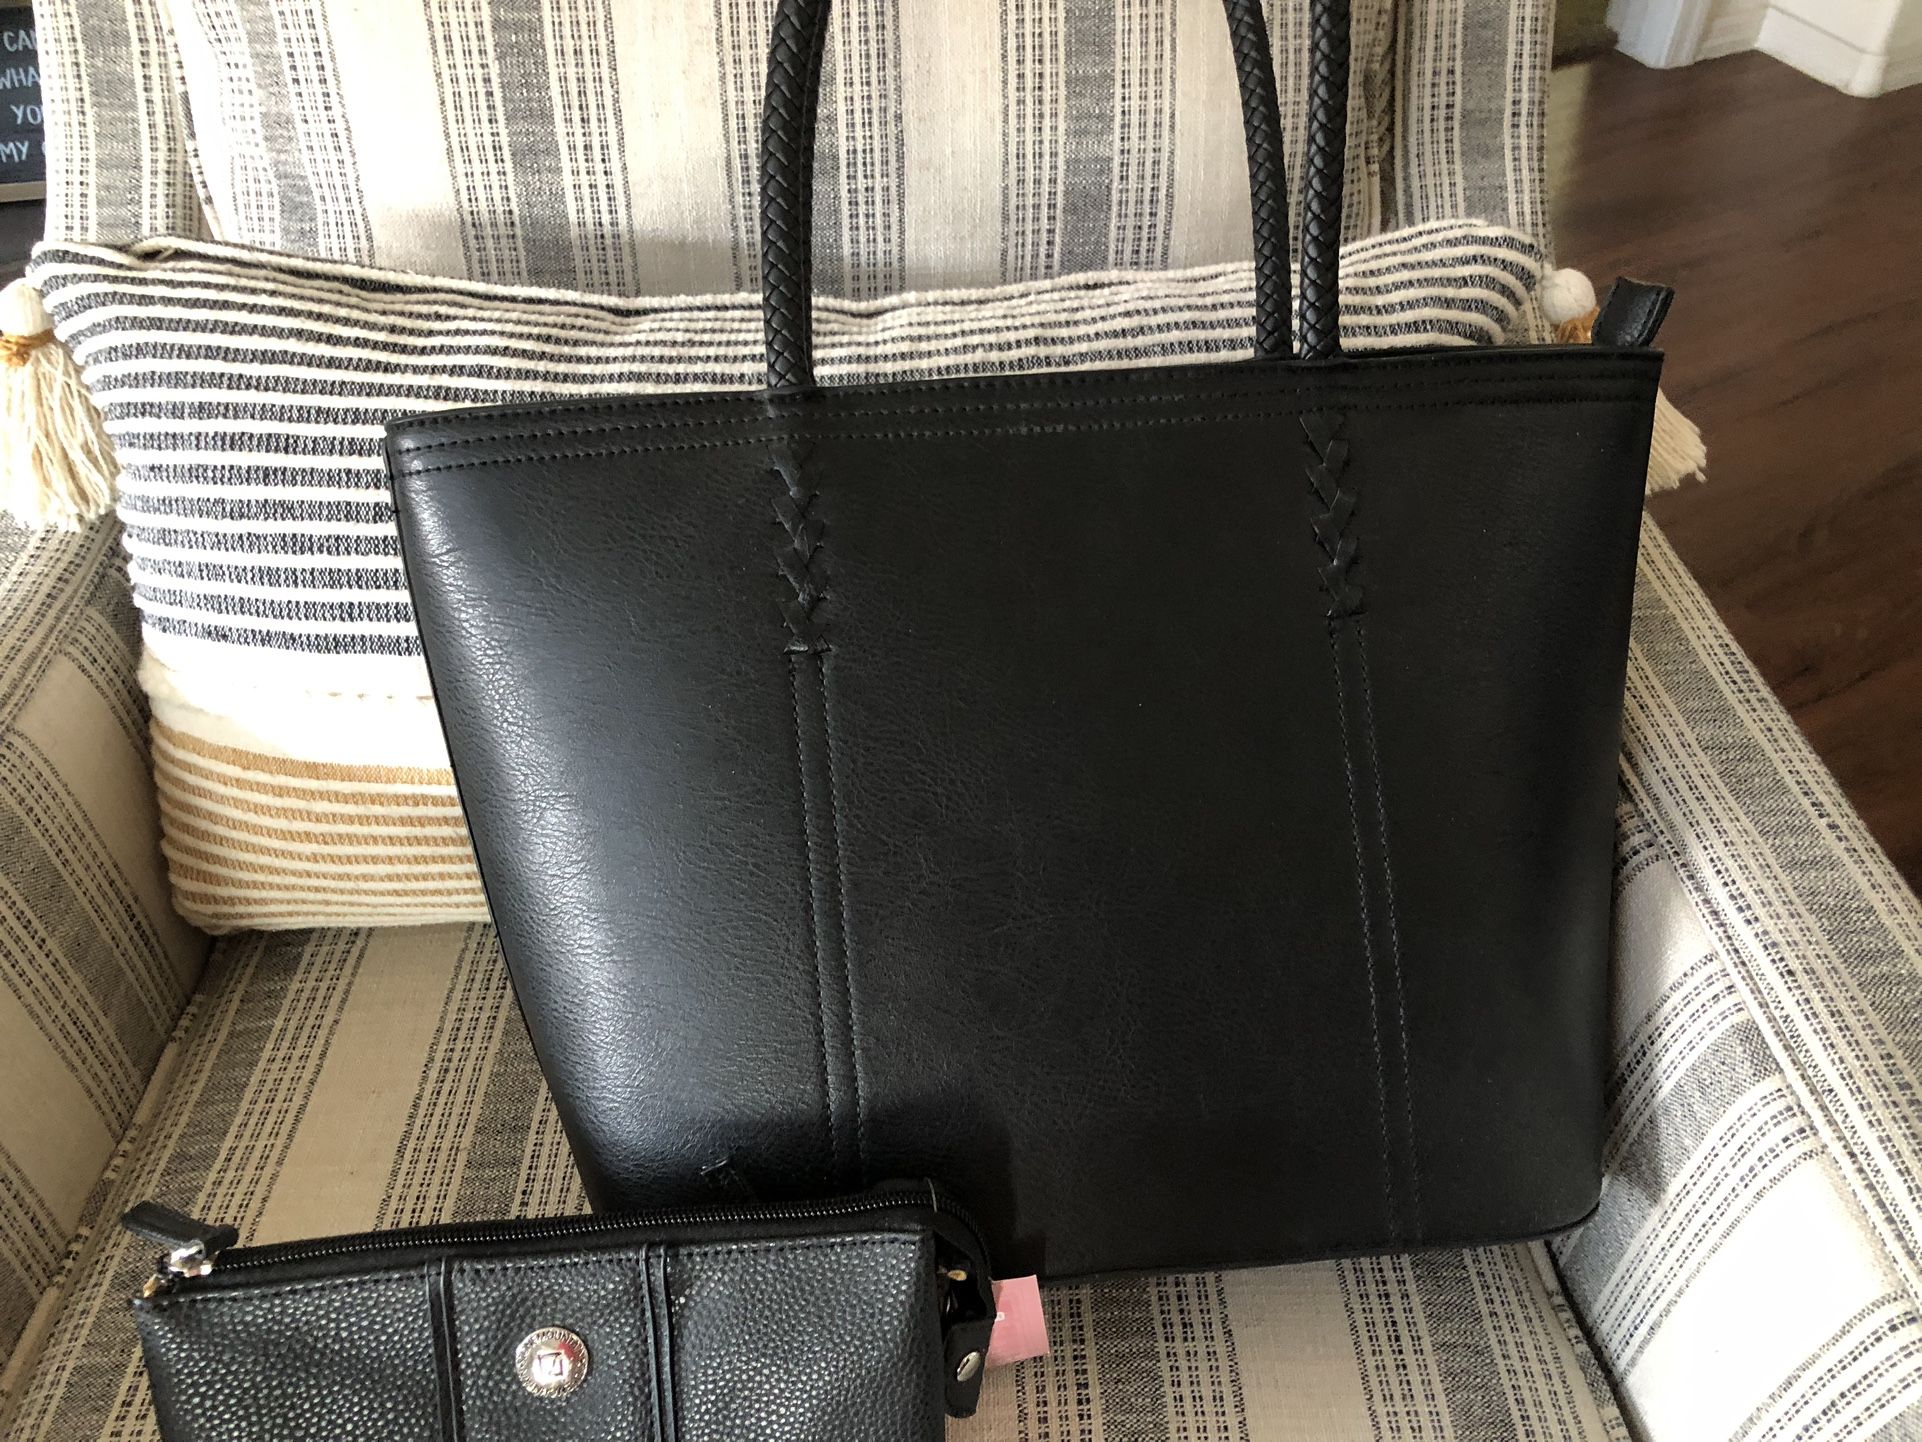 Large Bag with Small Wrist Wallet